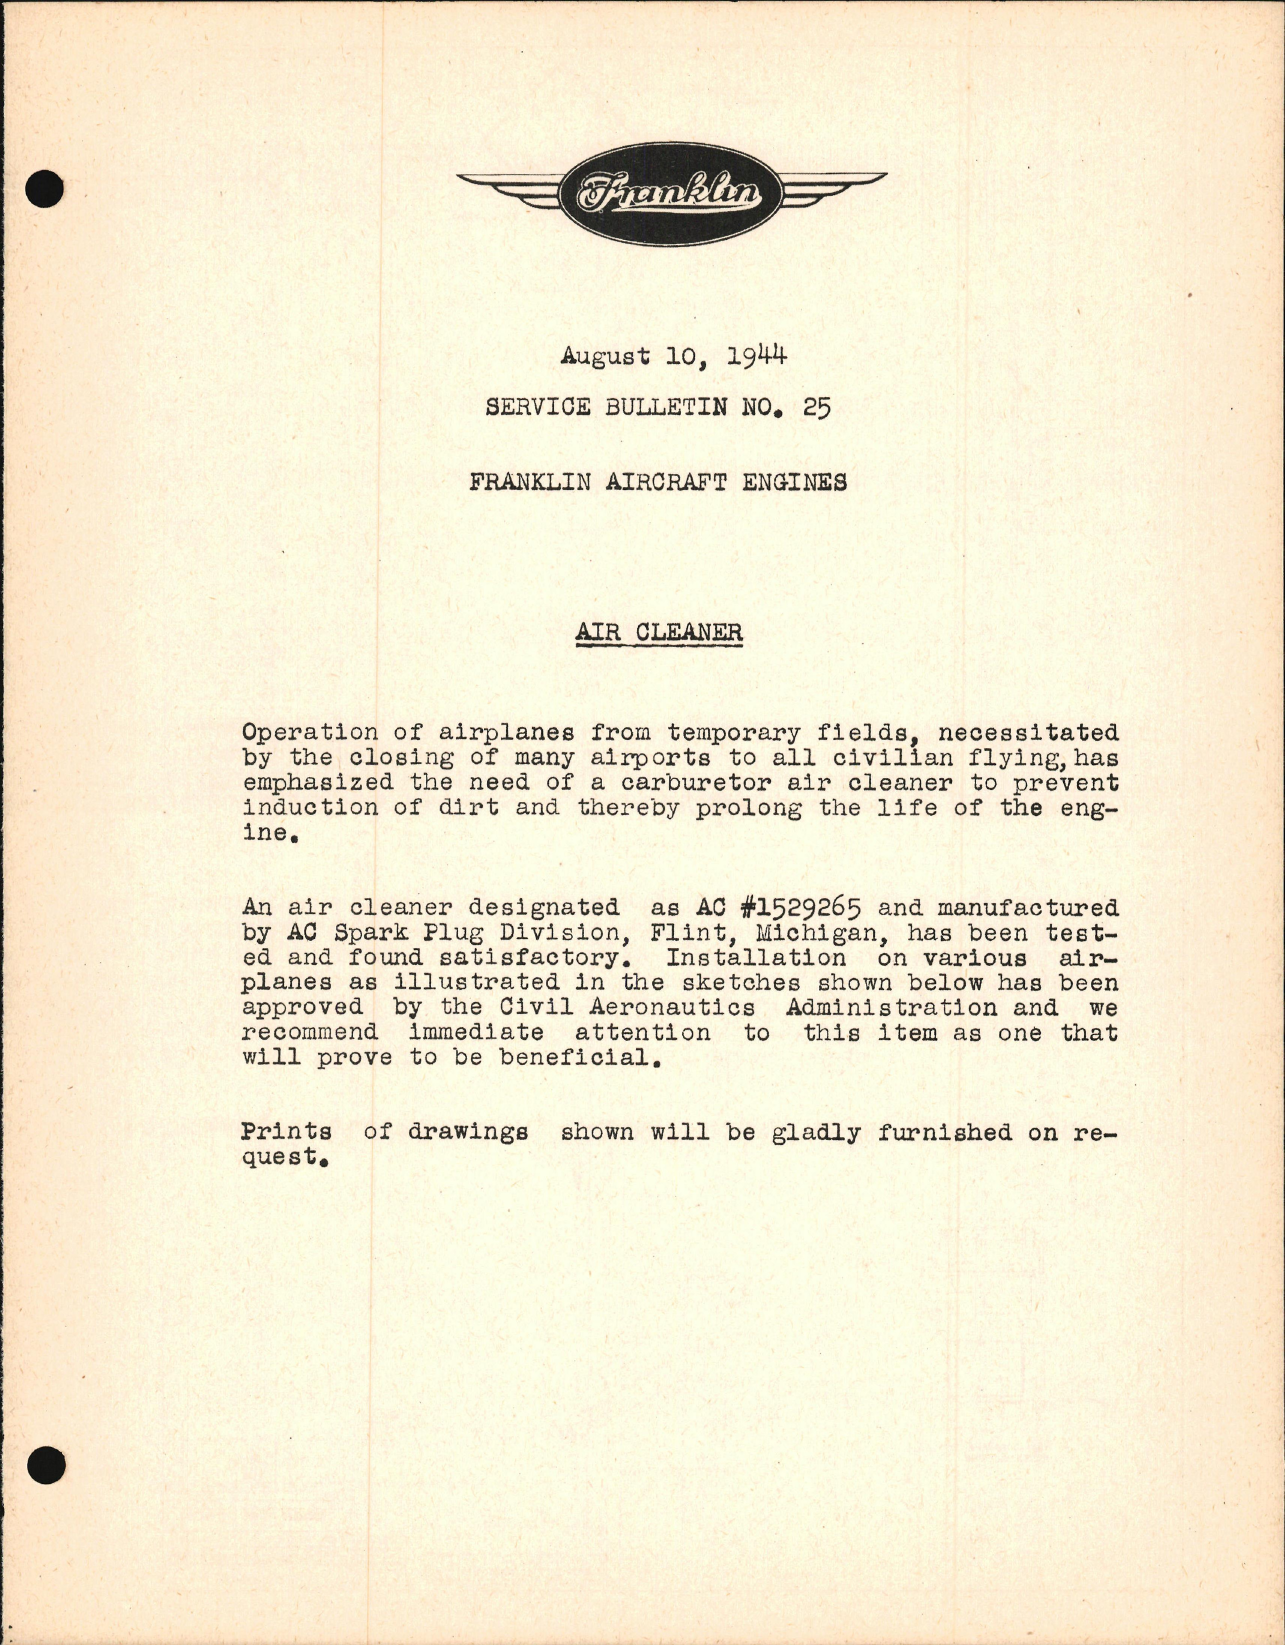 Sample page 1 from AirCorps Library document: Air Cleaner